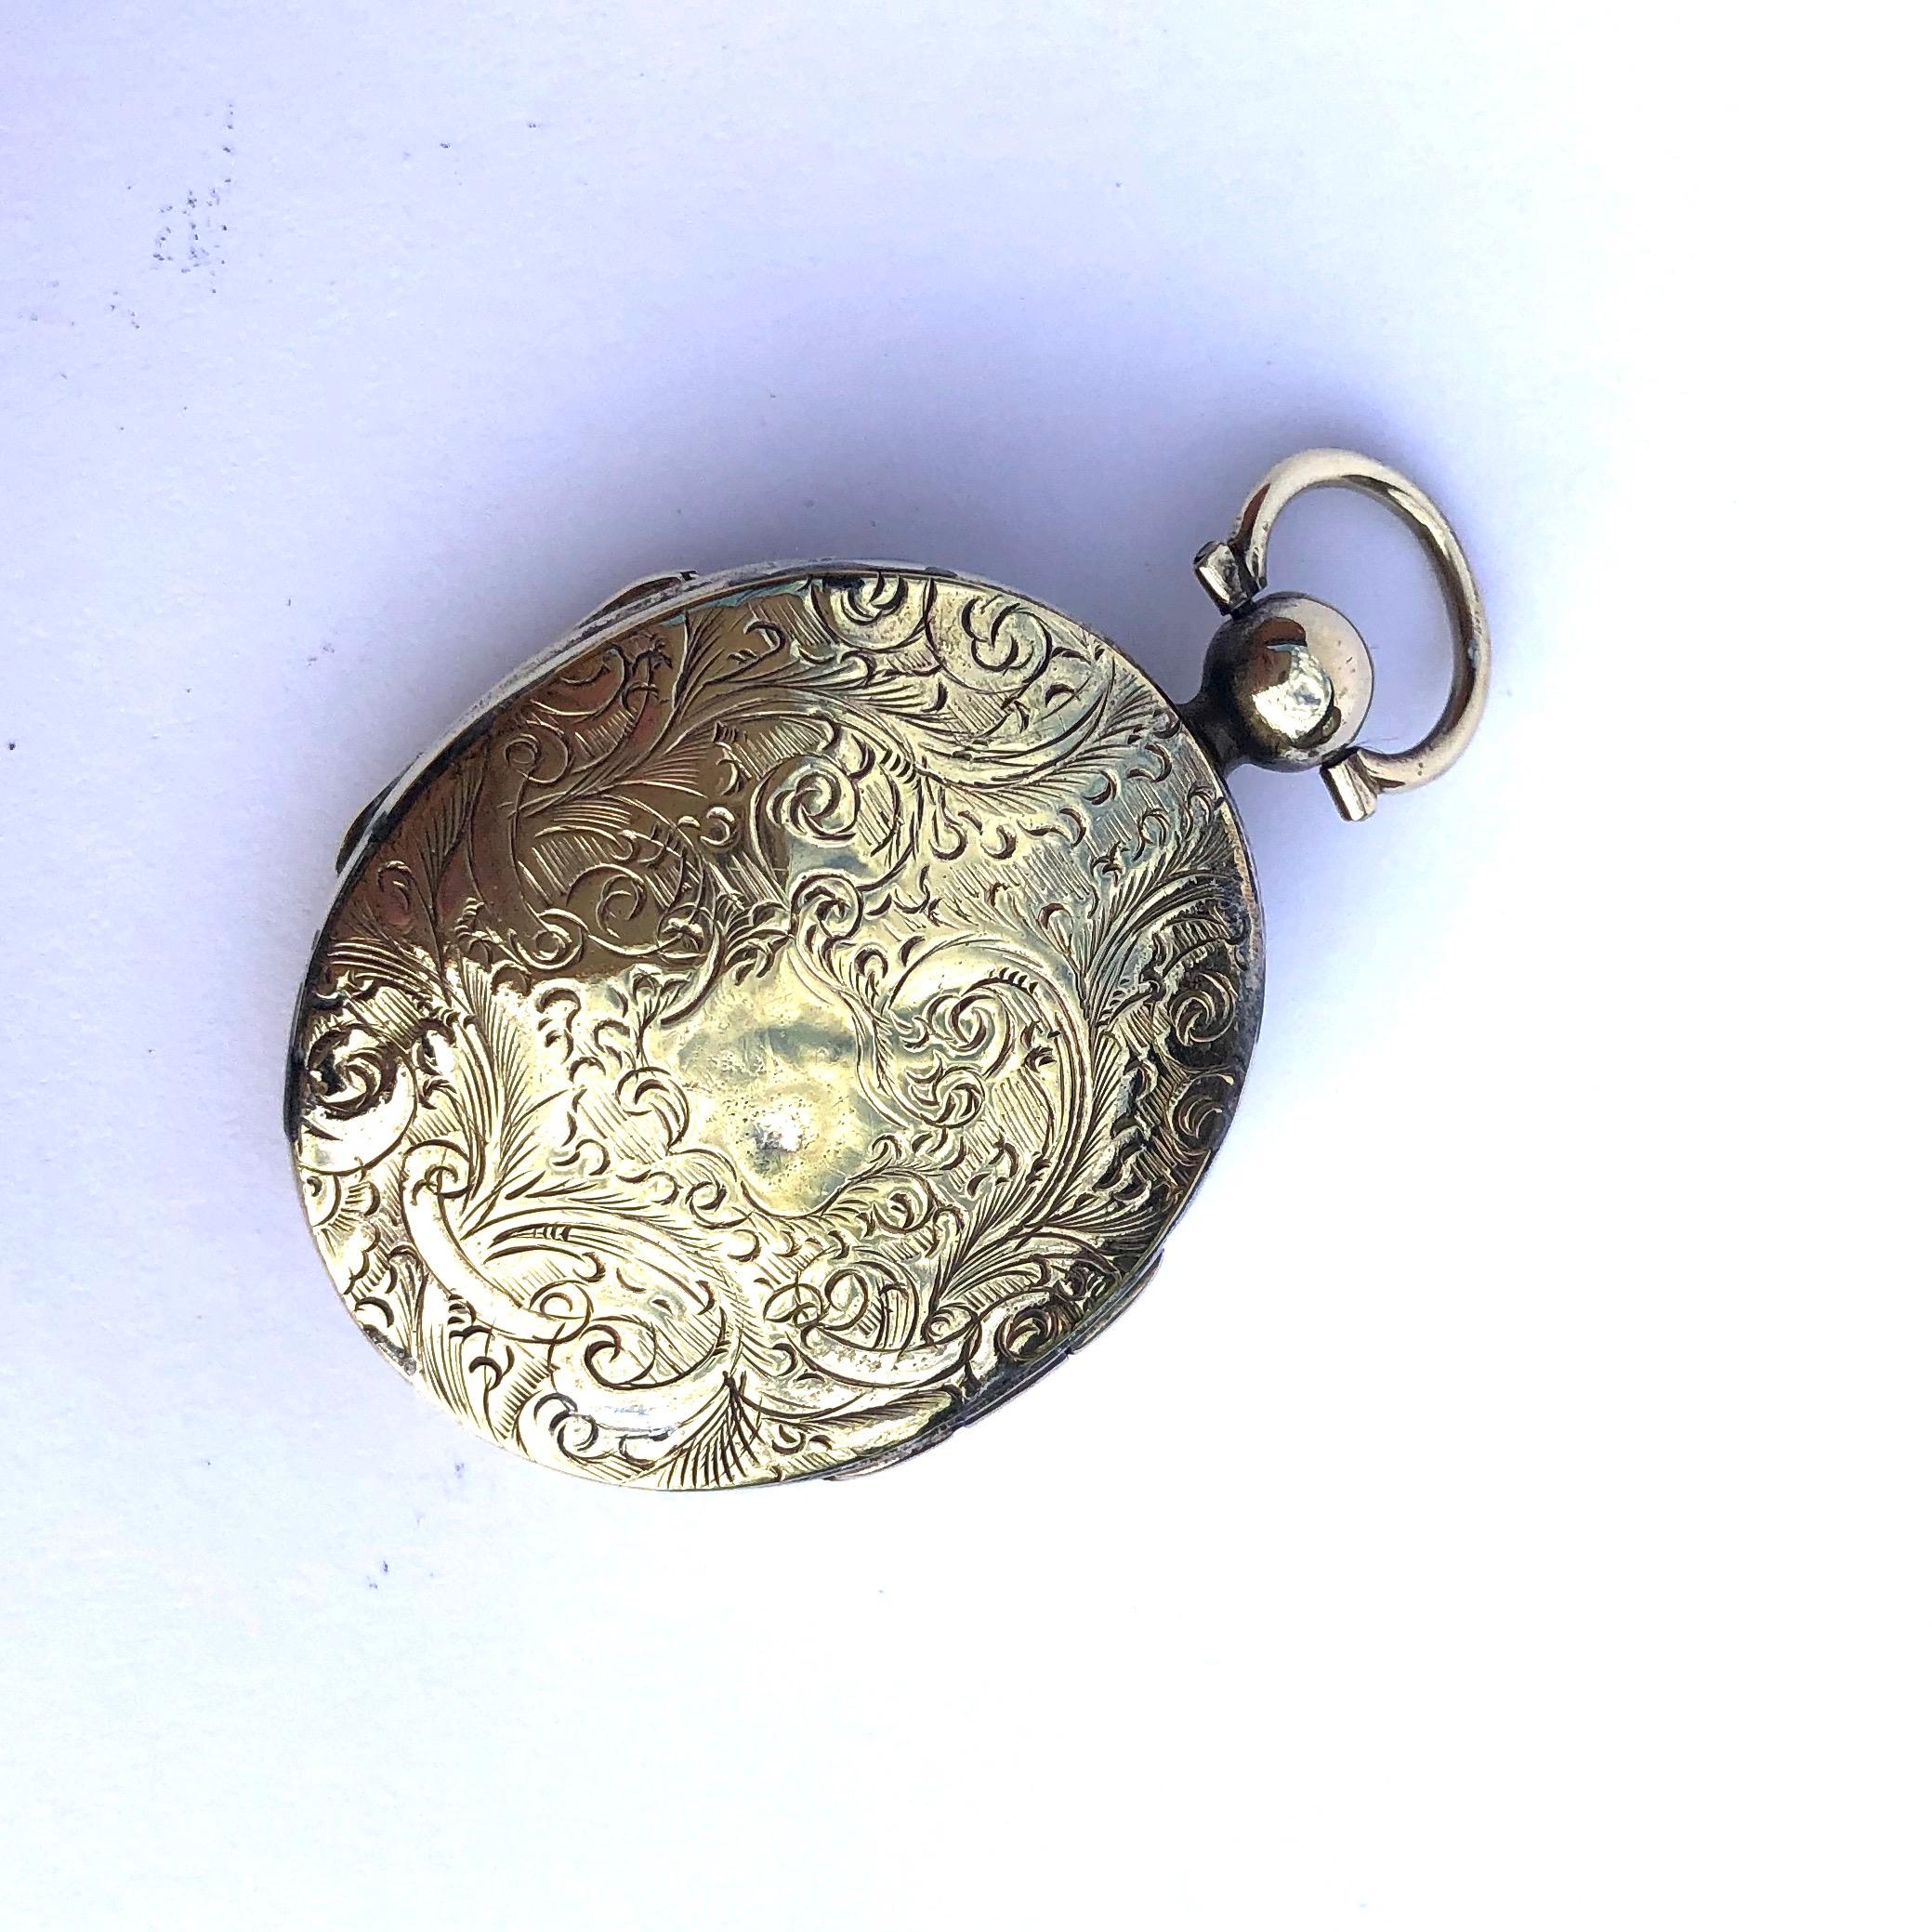 This sweetly engraved locket opens at the front and the back to reveal two separate compartments. The engraving has scroll and flower detail on both sides.

Dimensions Fron Loop: 46x27mm  

Weight: 19.7g